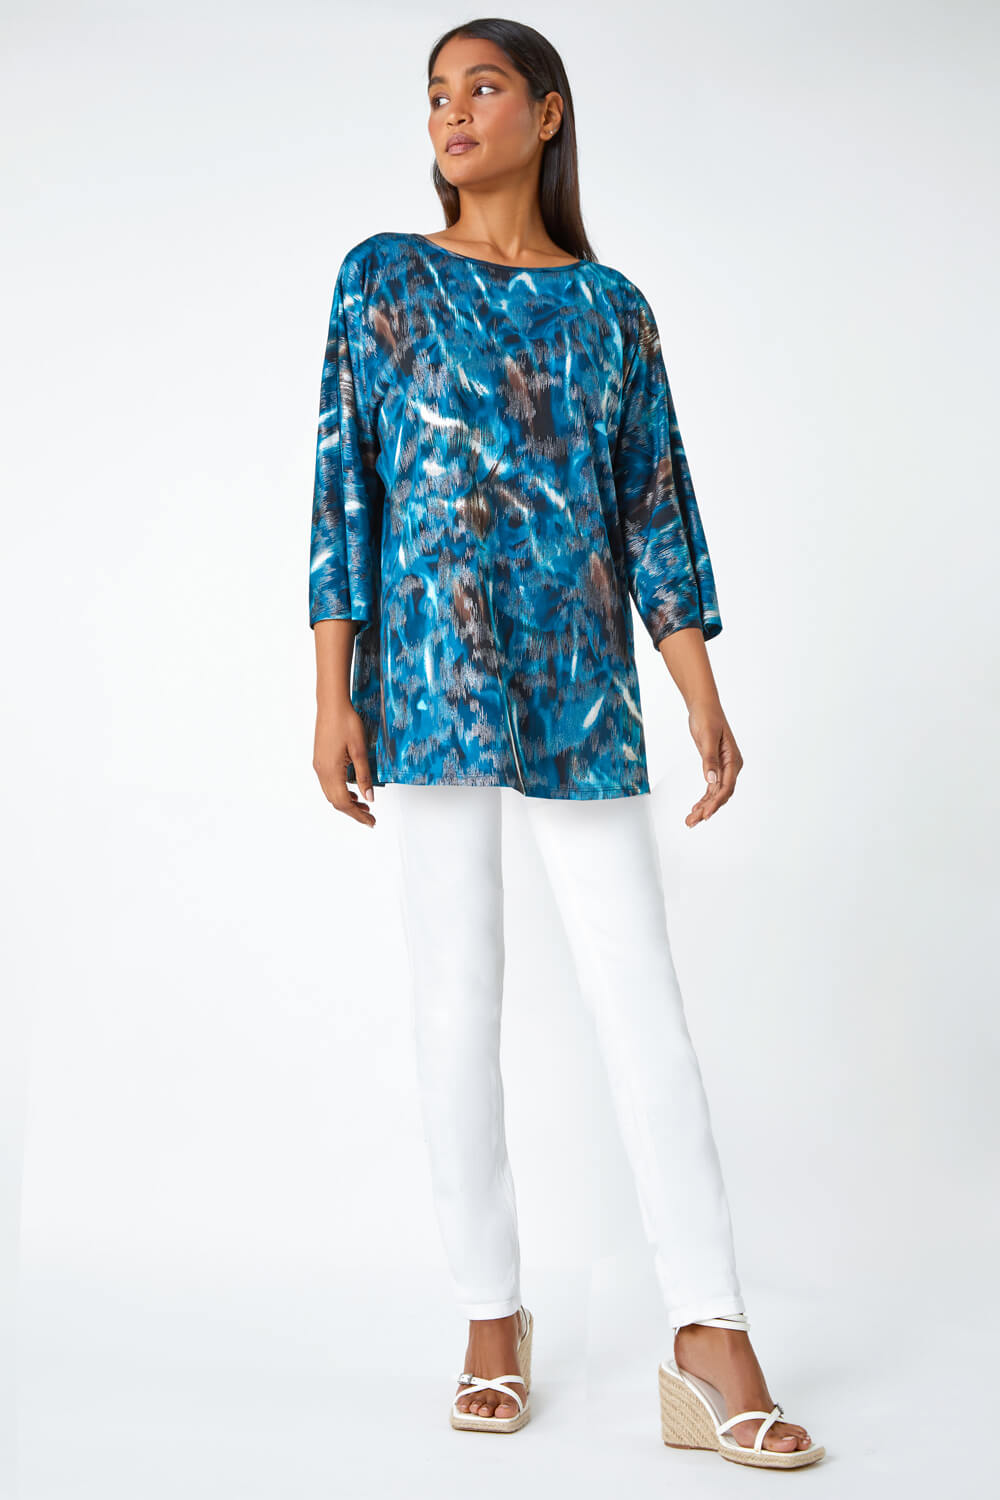 Blue Metallic Abstract Print Oversized T-Shirt, Image 2 of 5